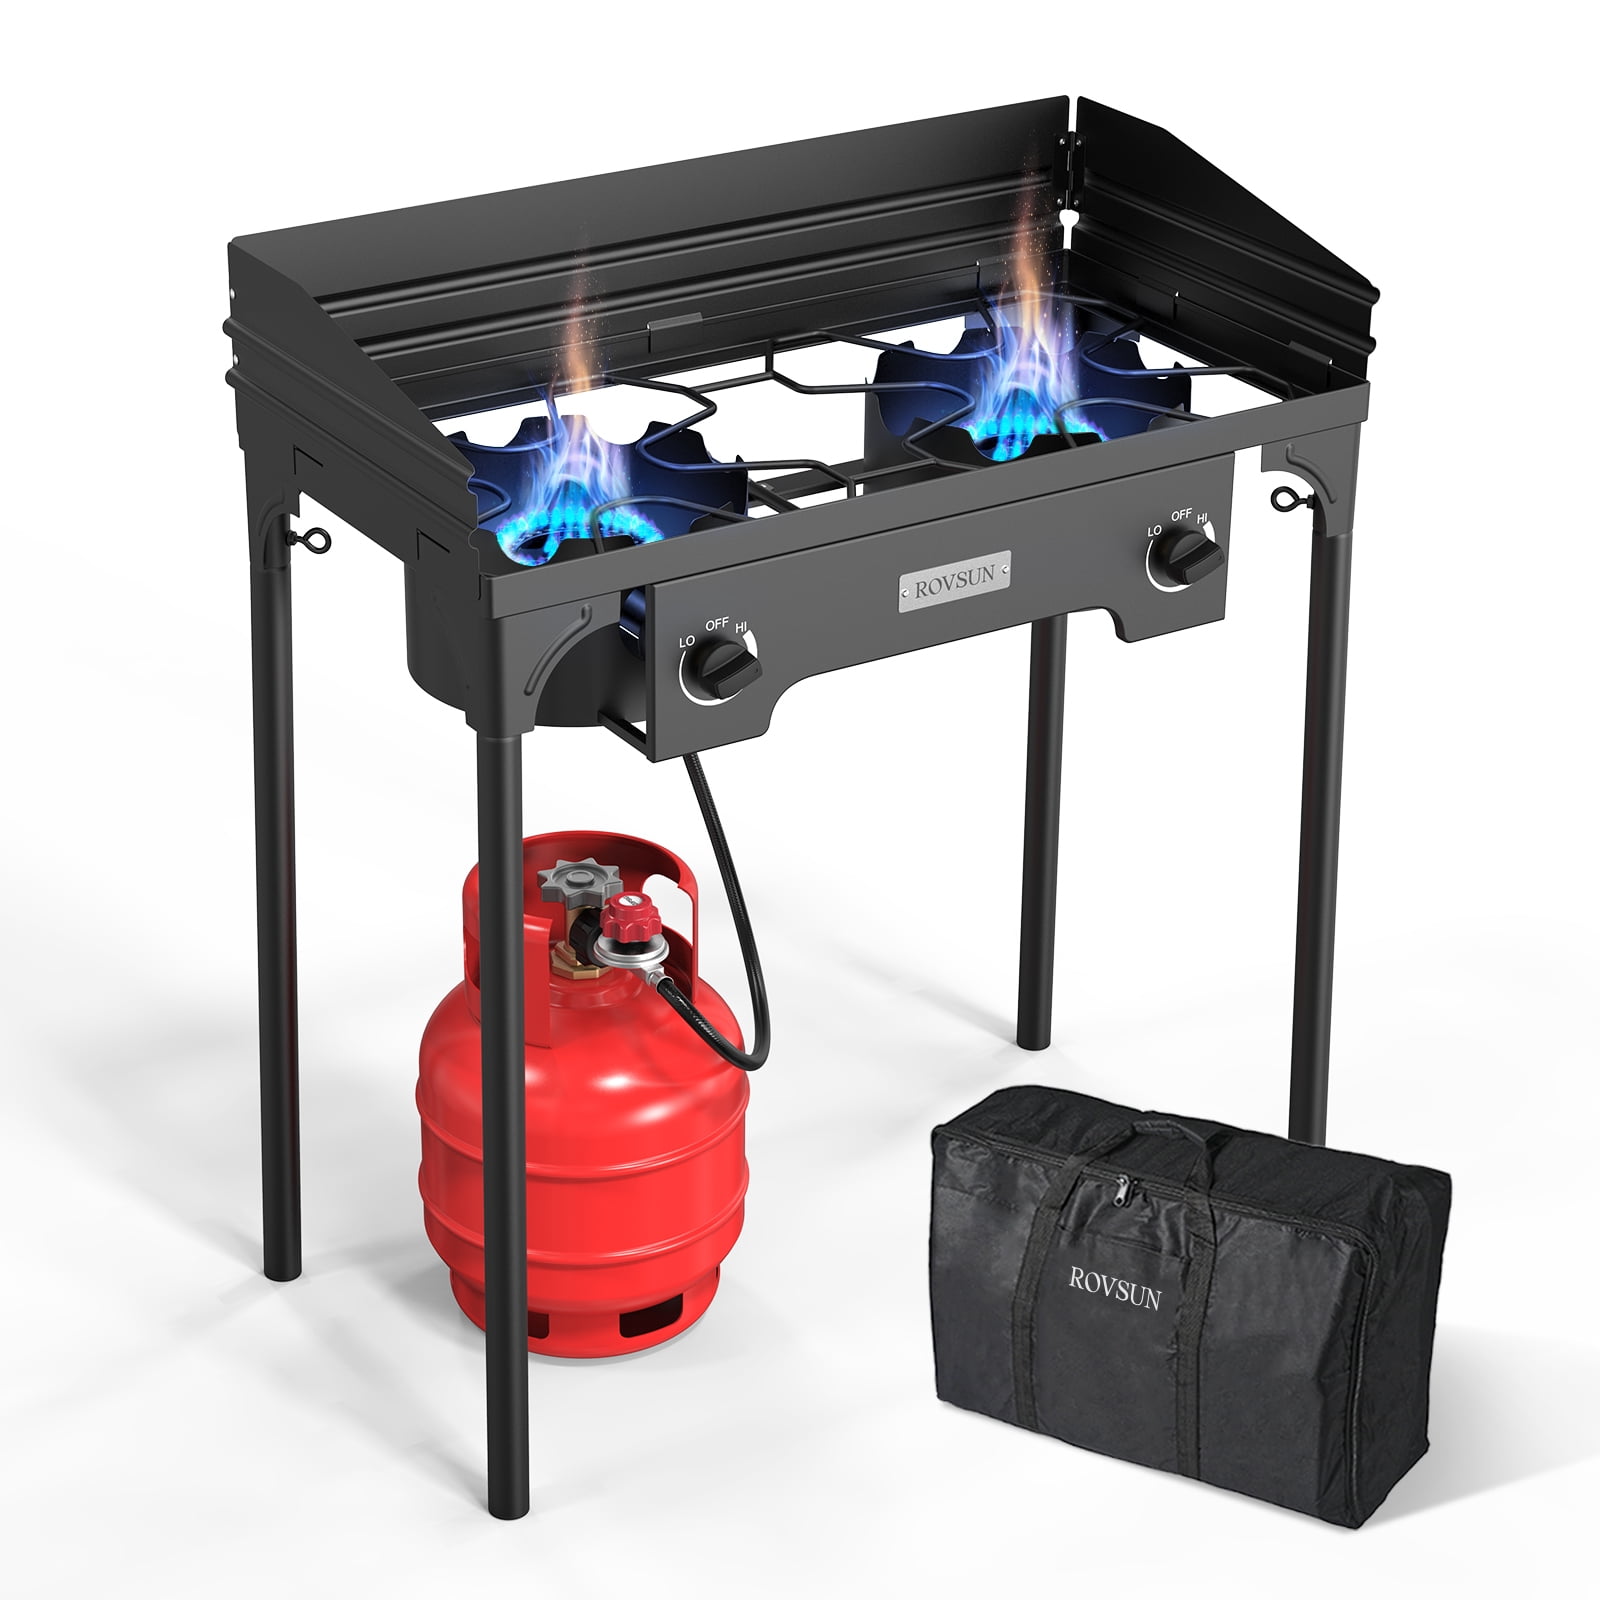 This is a Belanger Wood/Propane Combination Cook stove. I don't